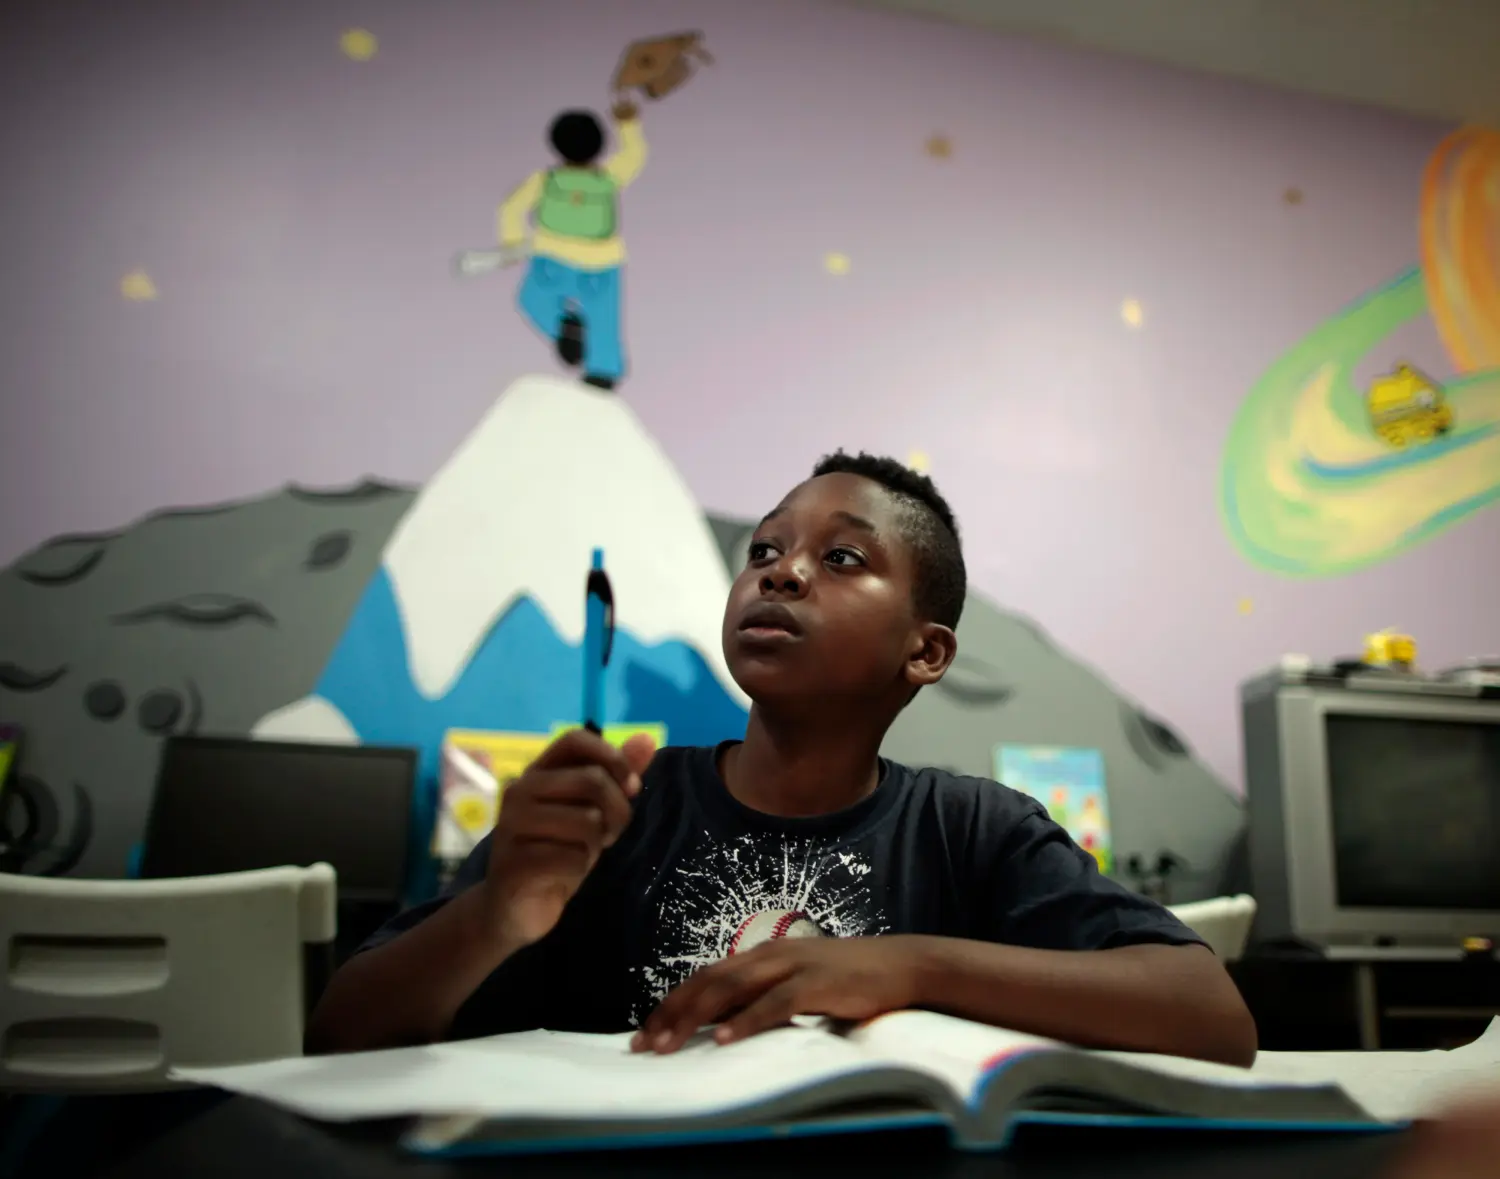 James, 10, calls for a tutor at South Los Angeles Learning Center in Los Angeles, California March 16, 2011. The center is run by School on Wheels, which uses volunteers to tutor homeless children in shelters, parks, motels, and two centers. There has been a surge in the number of homeless children in Los Angeles in the last five years, due to persistent unemployment and mounting foreclosures. REUTERS/Lucy Nicholson (UNITED STATES - Tags: SOCIETY EDUCATION)